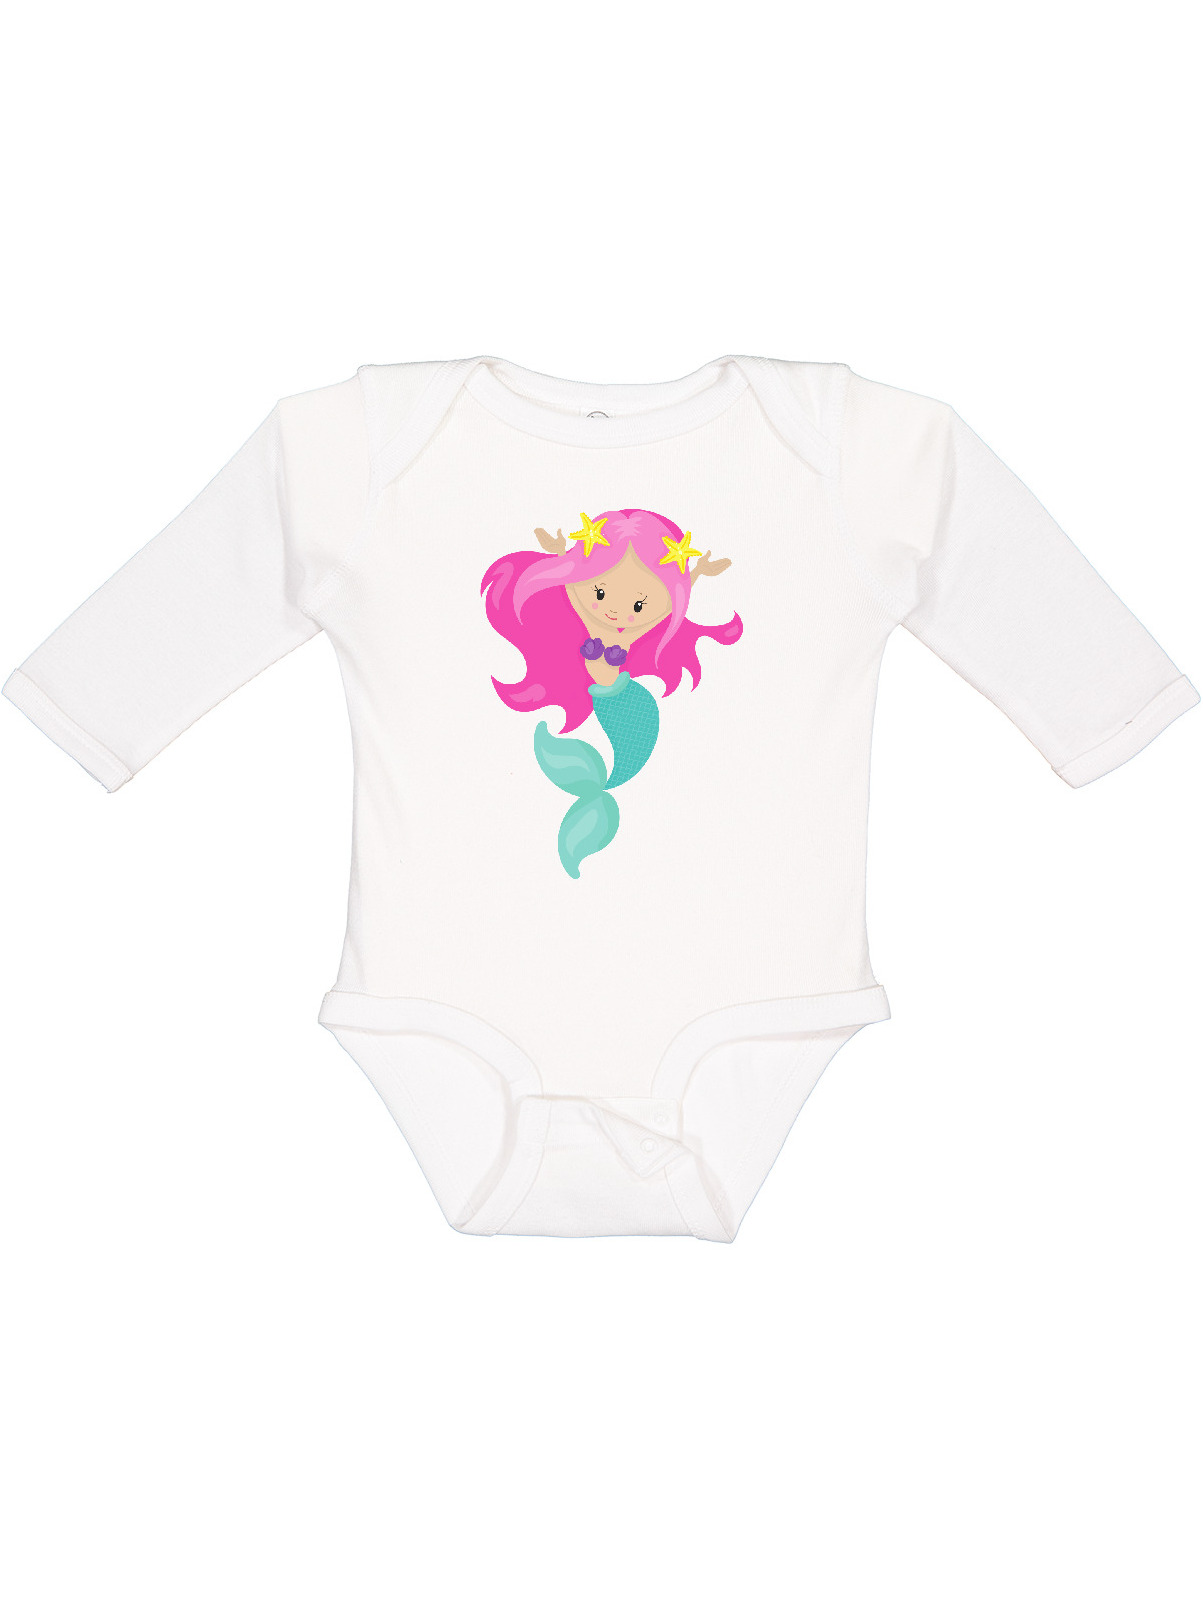 Inktastic Pretty Mermaid With Long Pink Hair and Green Tail Girls Long Sleeve Baby Bodysuit - image 1 of 4